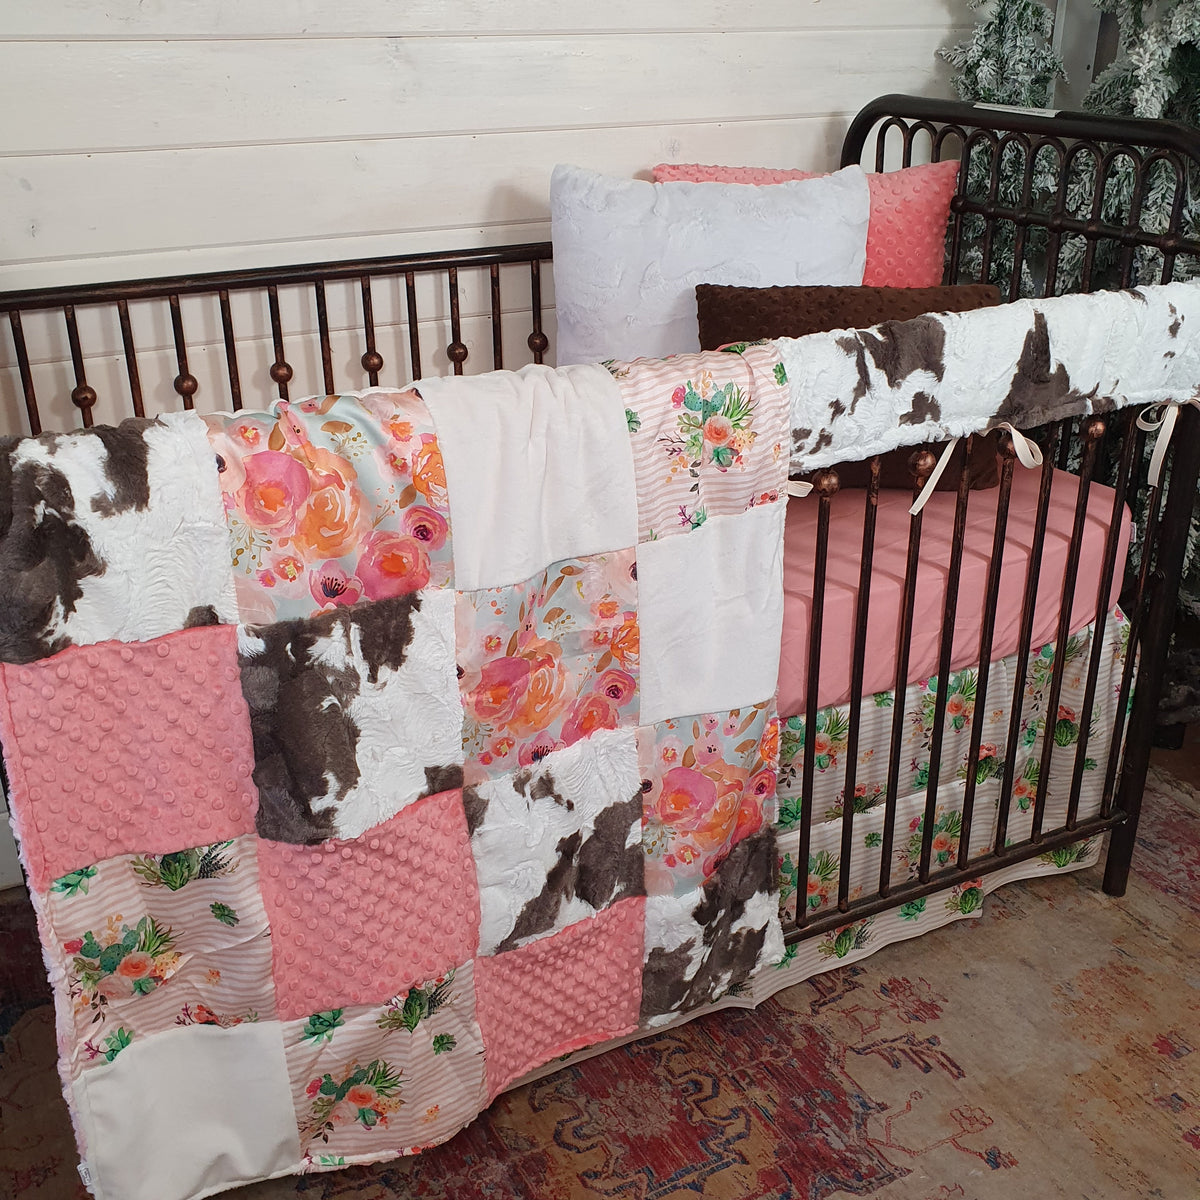 New Release Girl Crib Bedding- Watercolor Floral and Brownie Calf Minky Western Baby Bedding Collection - DBC Baby Bedding Co 